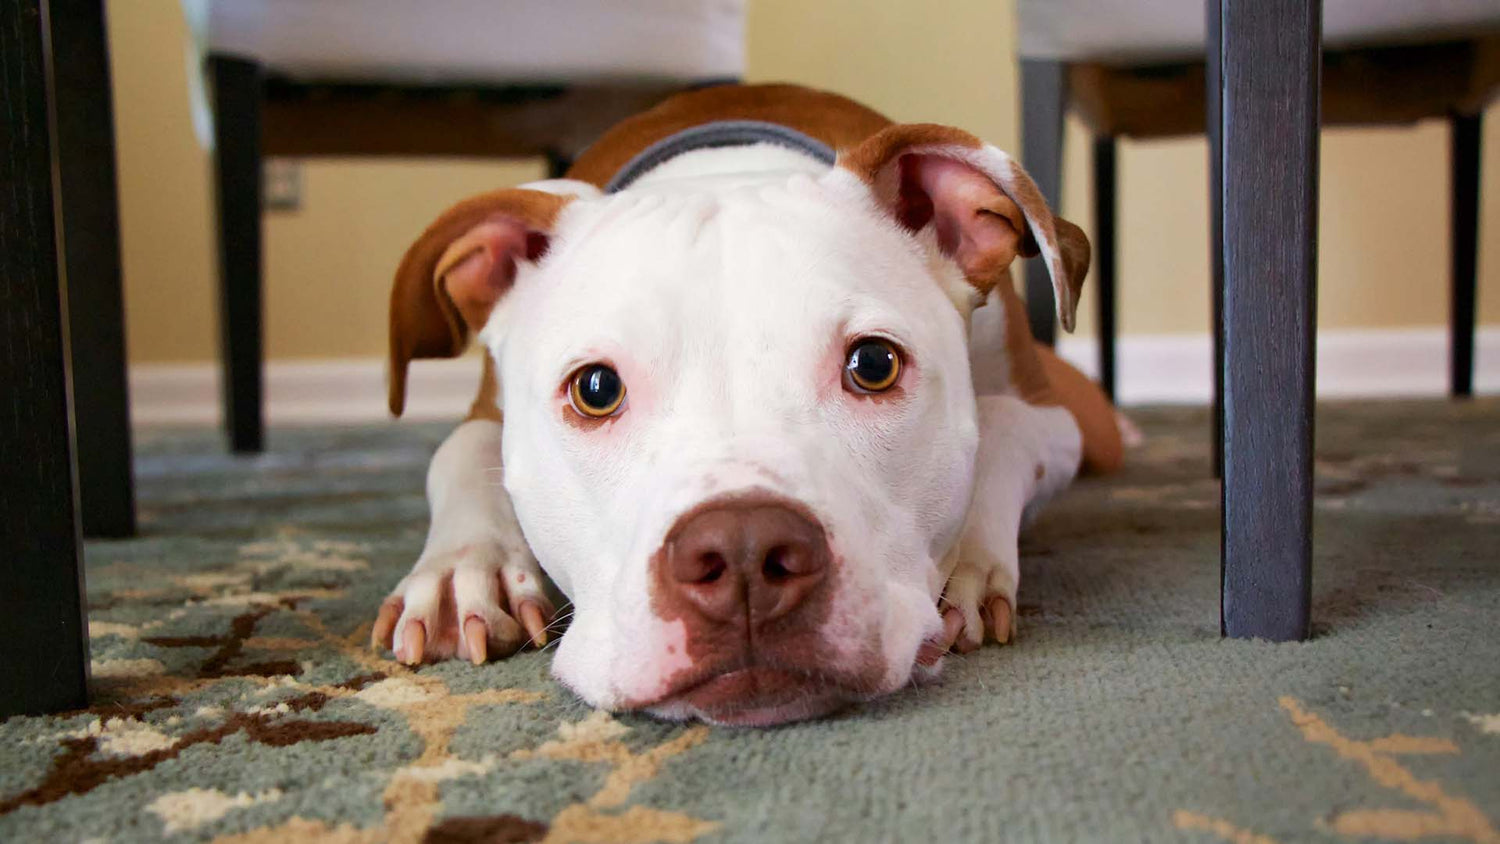 Dog with white face and paws lying on a carpet looking at the camera.